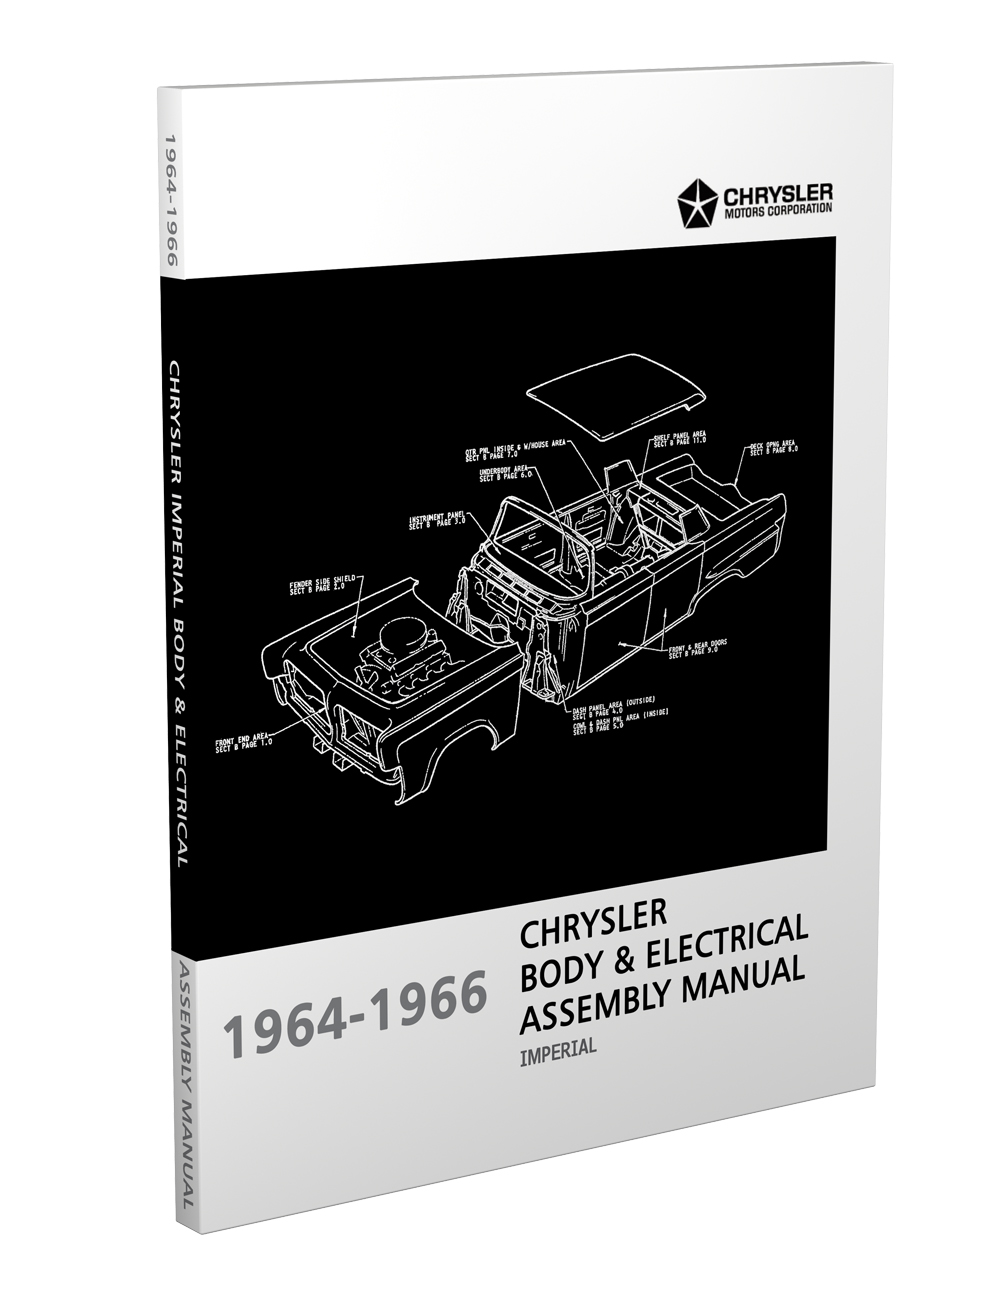 1964-1966 Chrysler Imperial Body & Electrical Assembly Manual Reprint